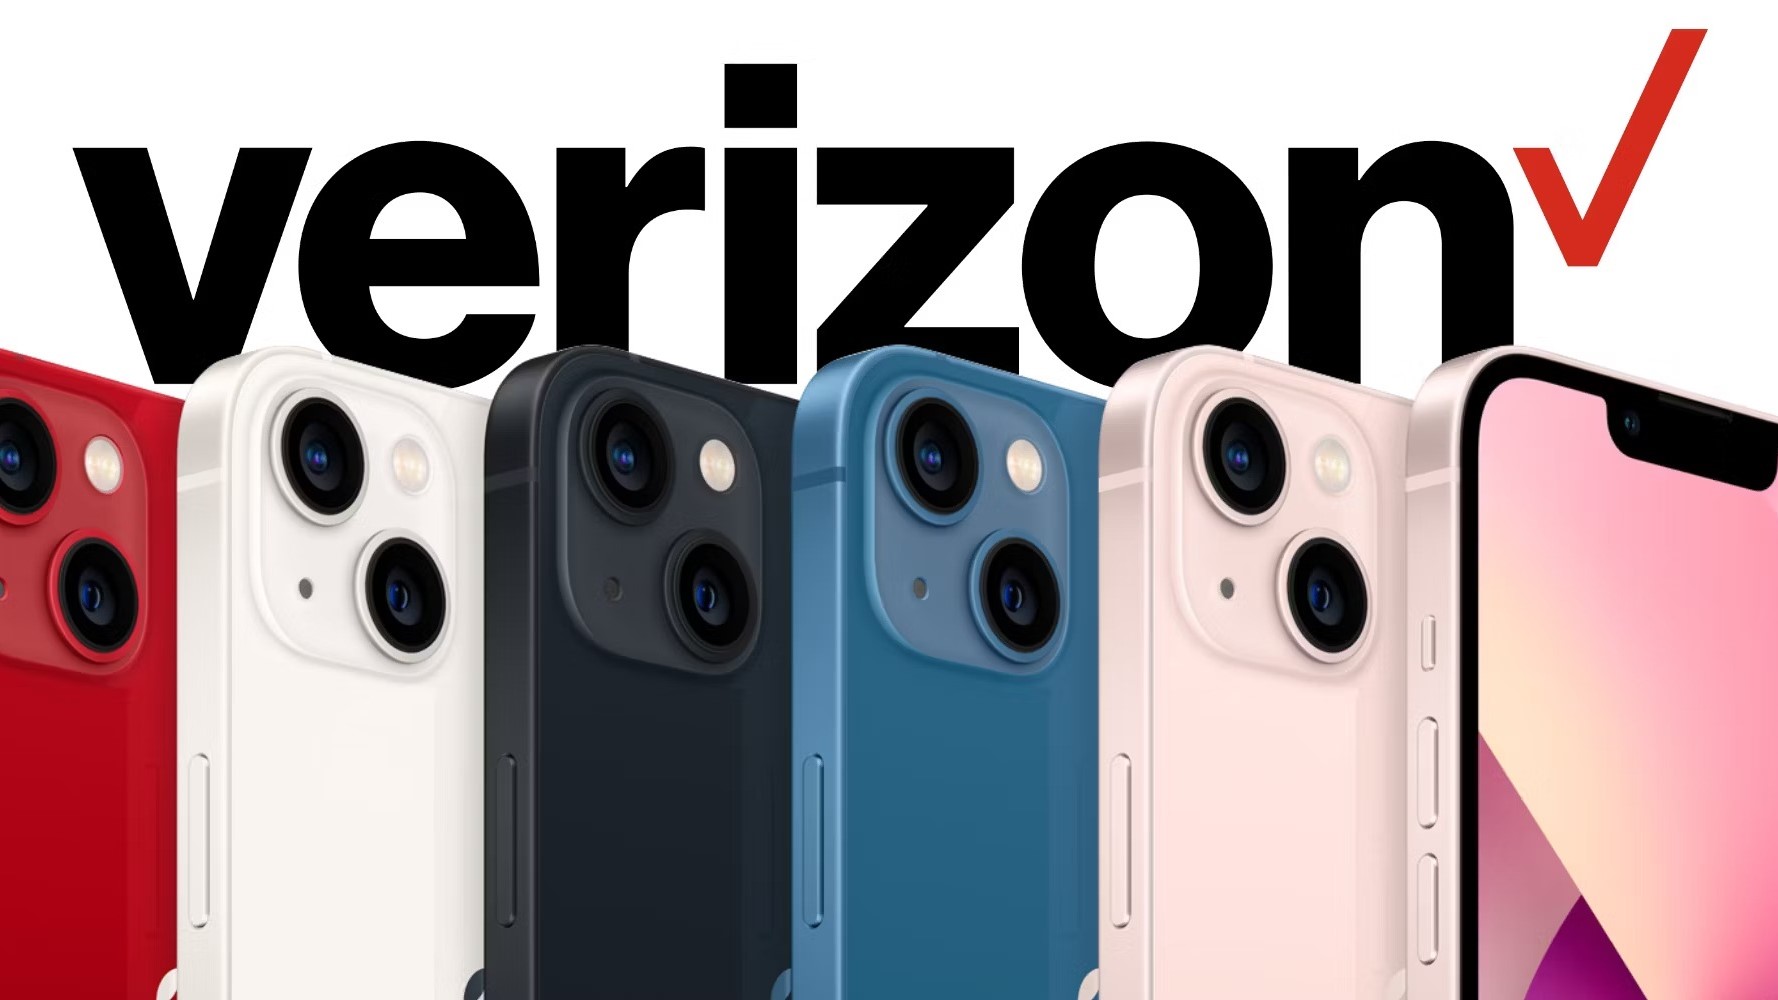 Carrier Deal Inquiry: Understanding The Verizon Deal For IPhone 13